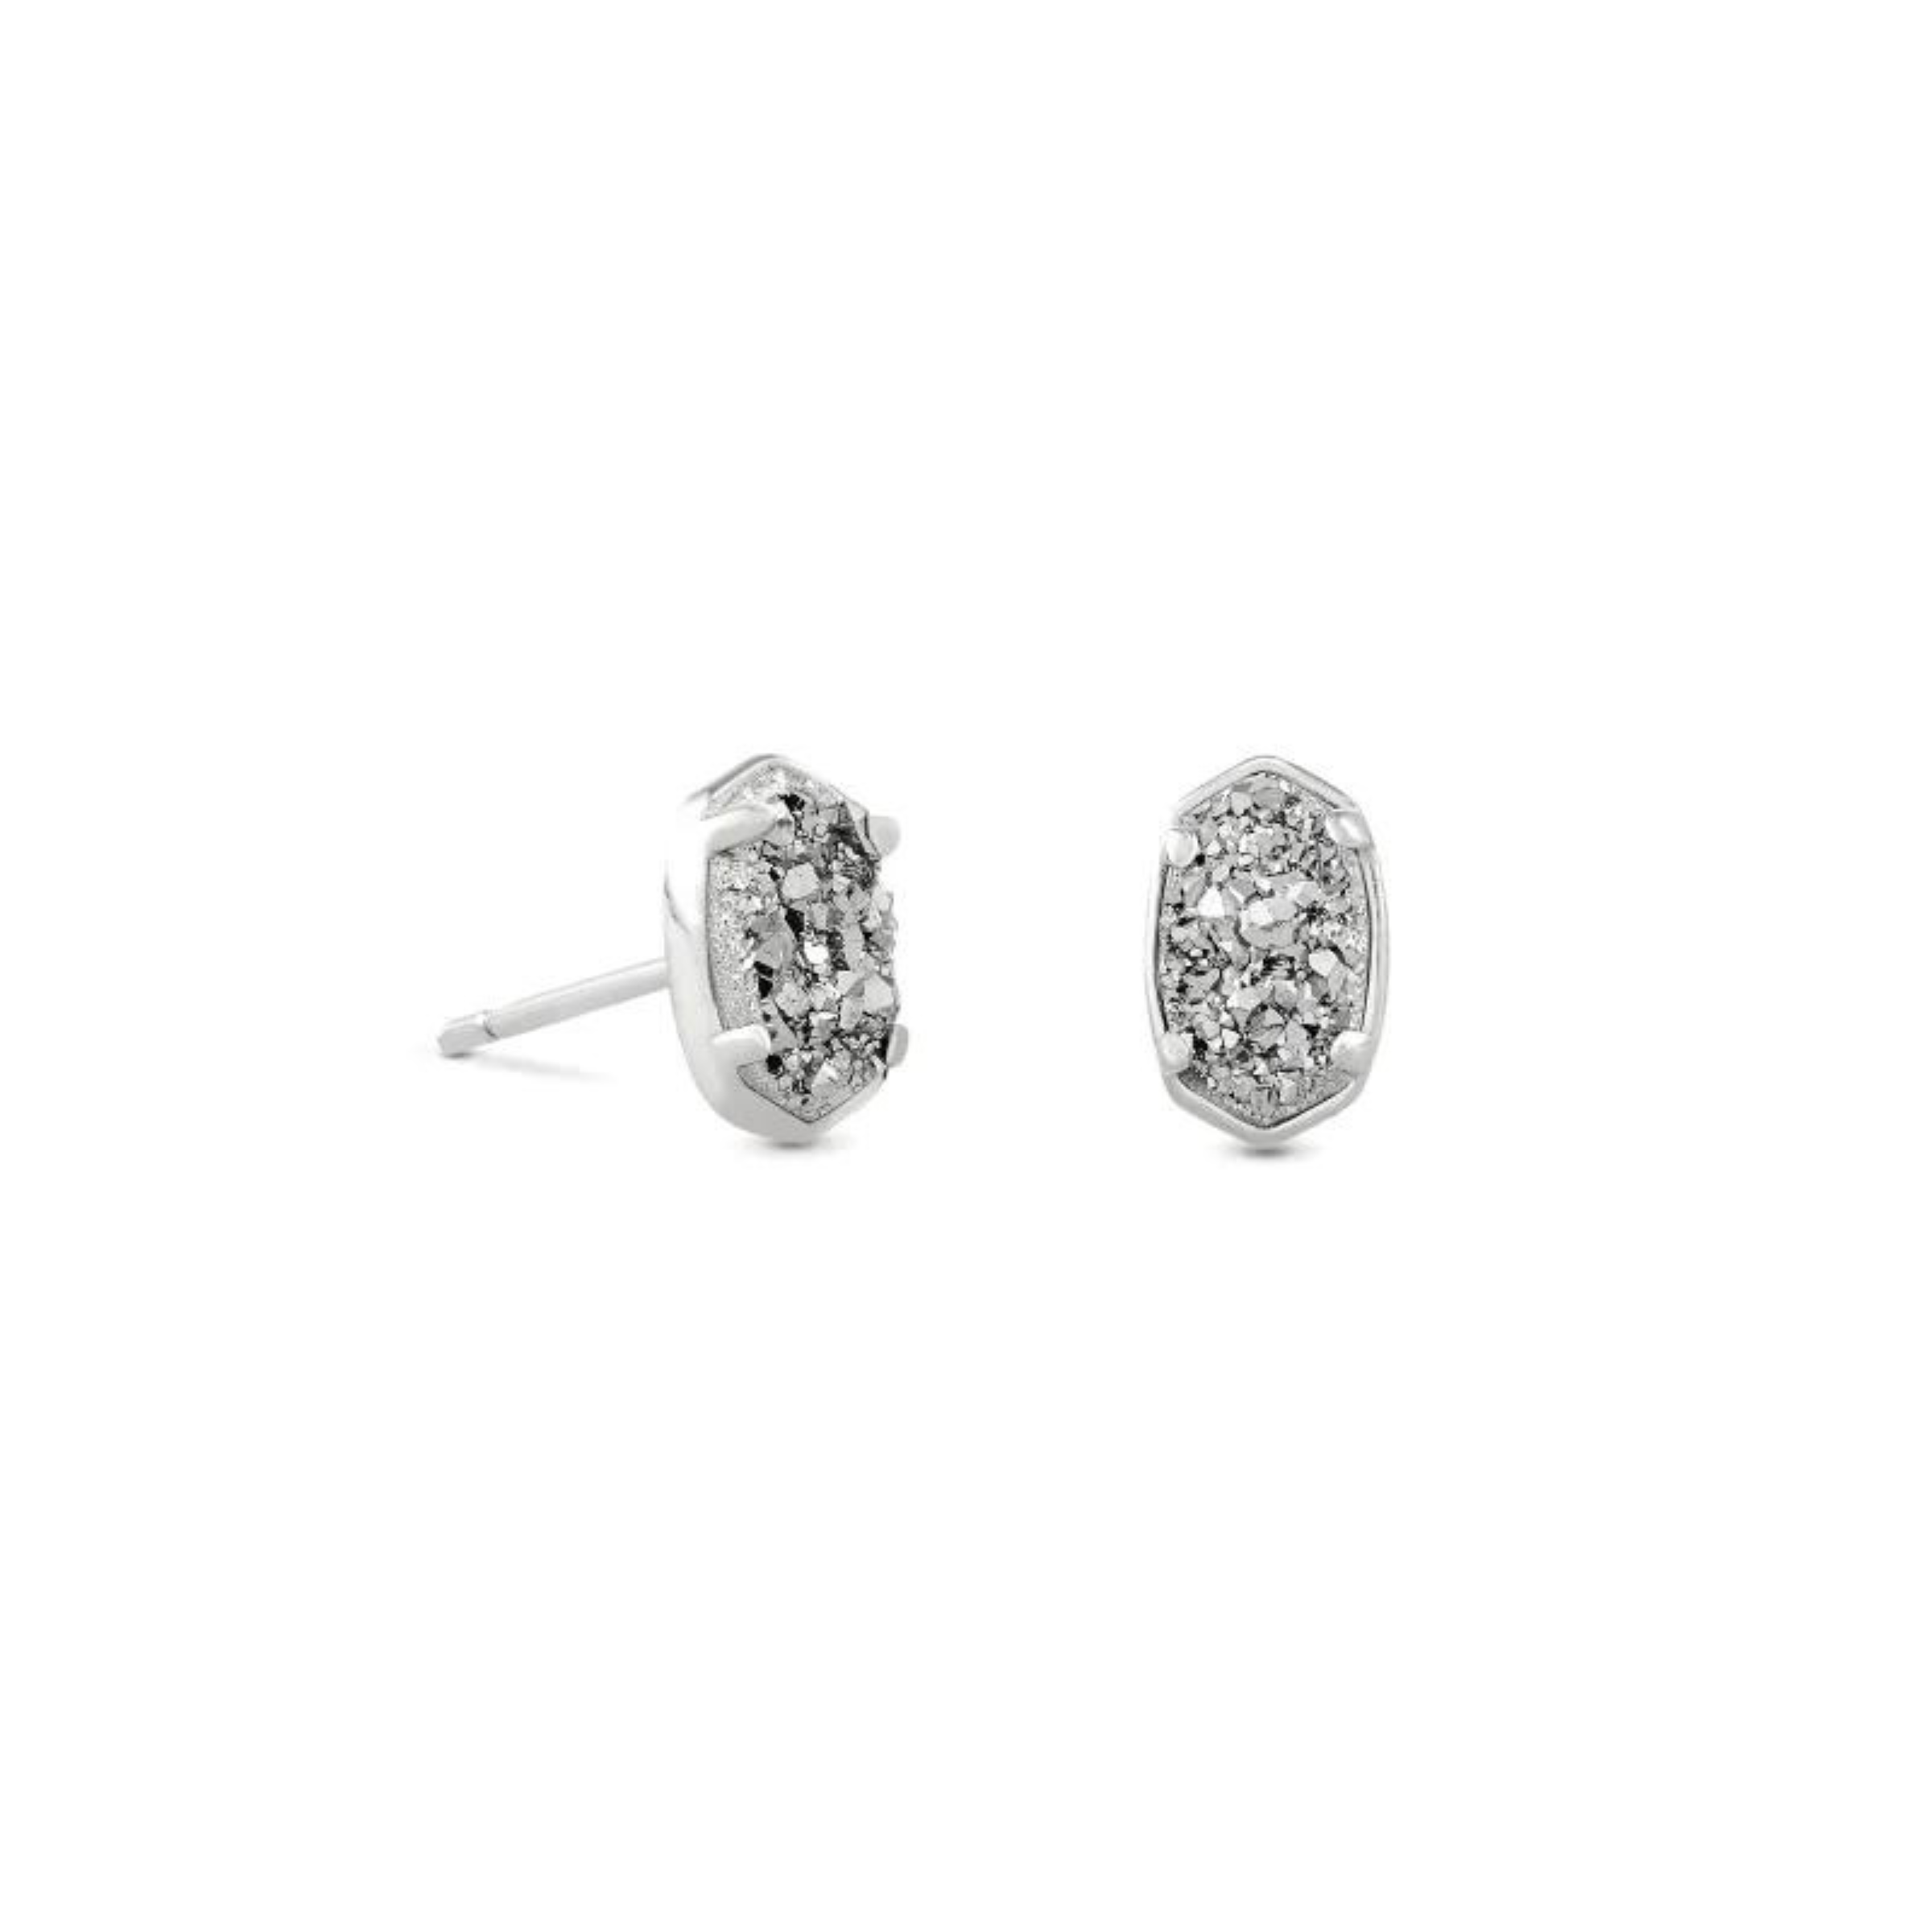 Silver, oval stud earrings with a platinum drusy stone. These earrings are pictured on a white background. 